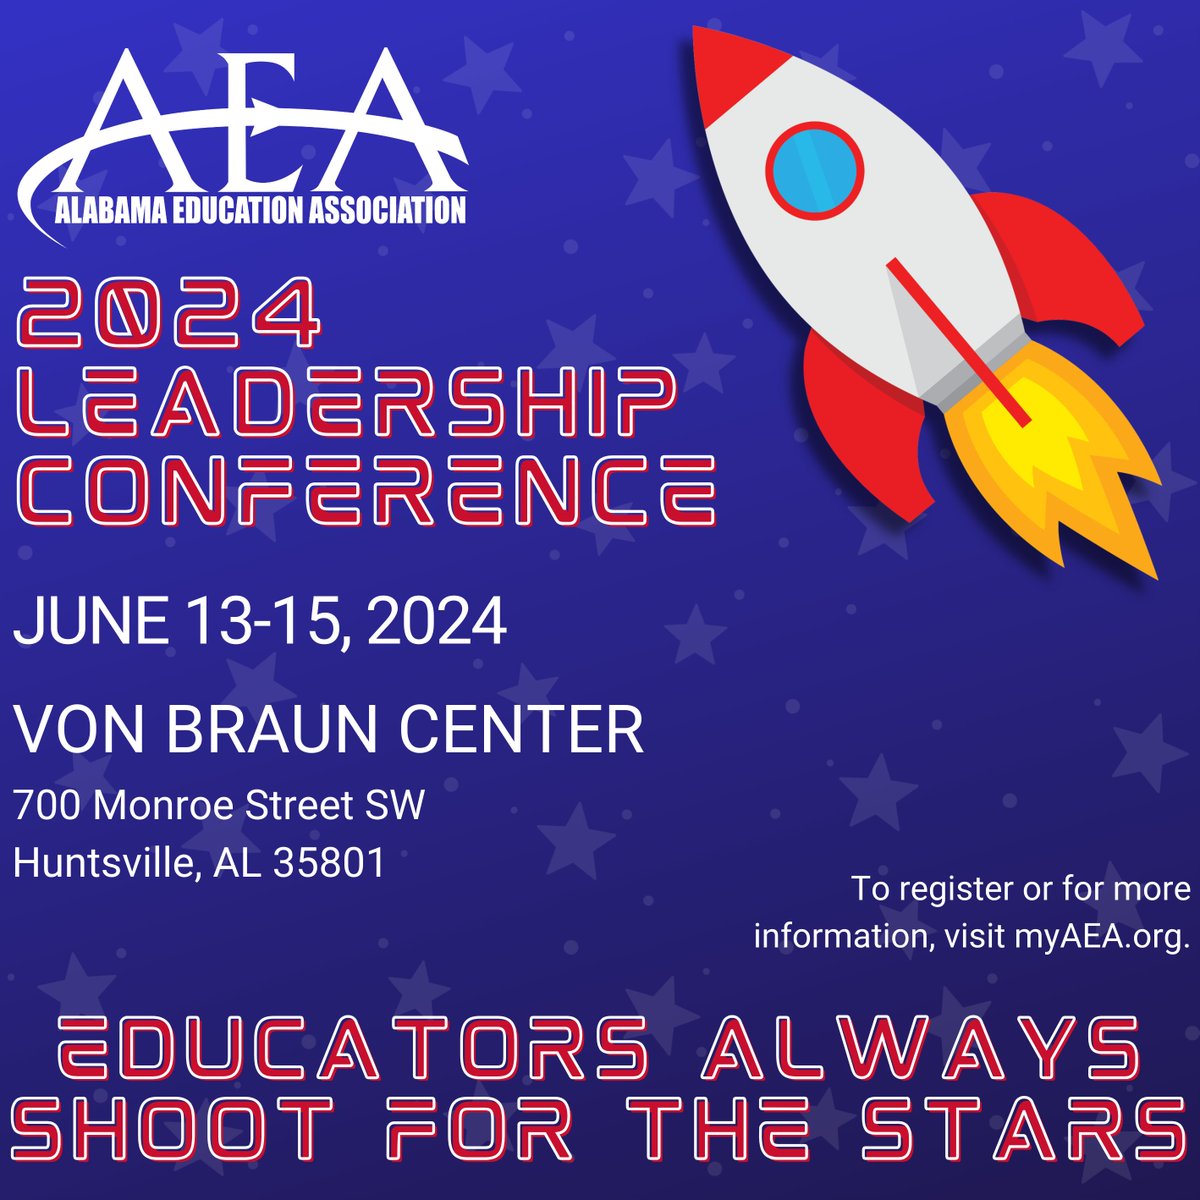 All roads lead to Huntsville for the 2024 AEA Leadership Conference! You don't want to miss this conference filled with sessions to help you grow as a local leader. For more information and to register, visit myaea.org/aealeadership. #myAEA